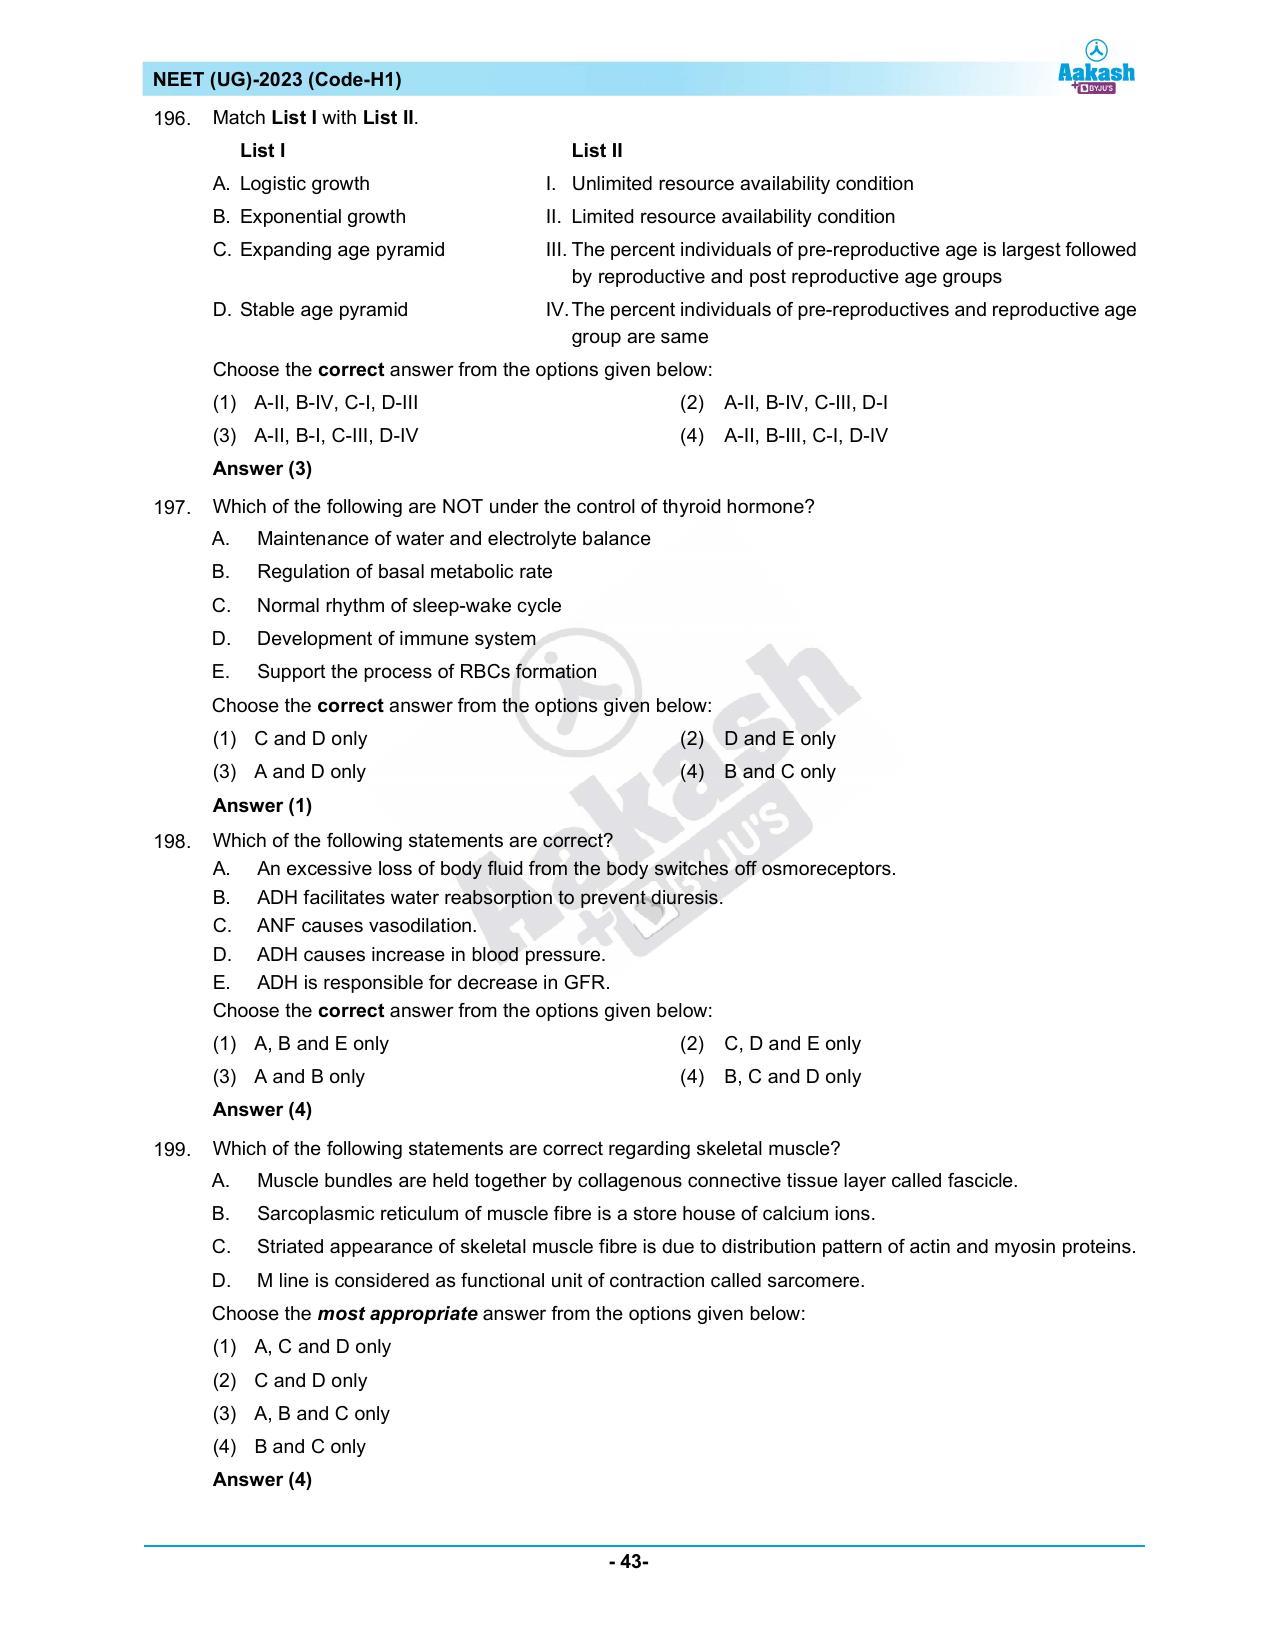 NEET 2023 Question Paper H1 - Page 43